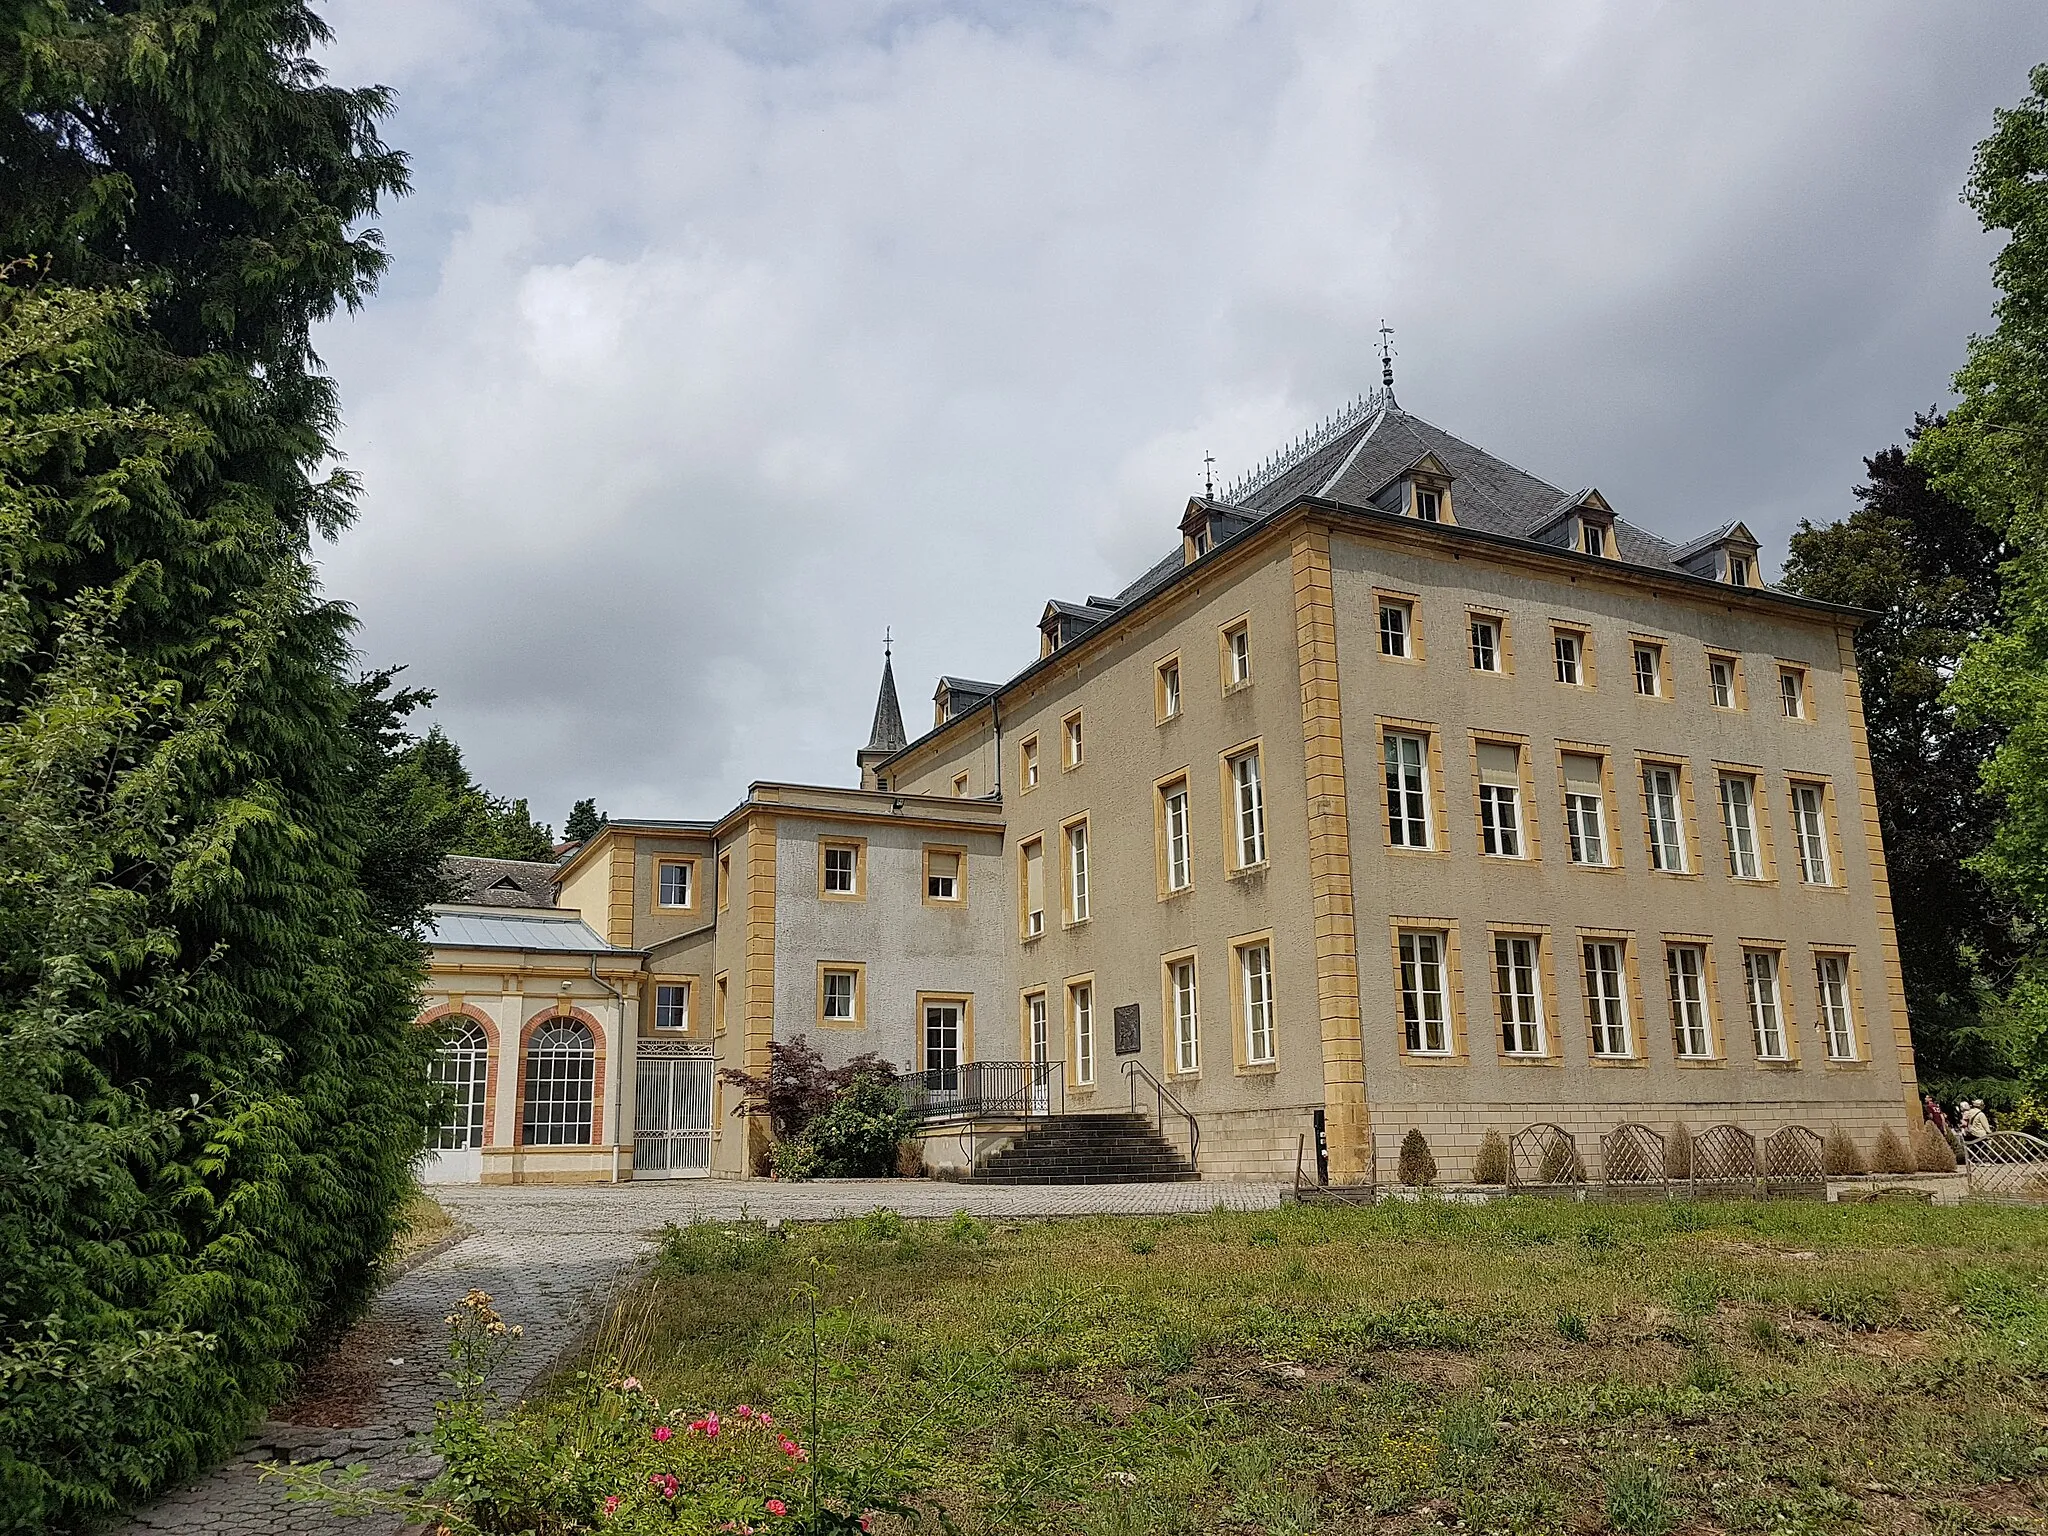 Photo showing: Schengen Castle was built in the 13th century as a moated castle. The castle is located in Schengen, Luxembourg. From the original moated castle only one of the four round towers is preserved. In 1968 this round tower was added to the "Lëscht vun de klasséierte Monumenter" (protected monument). Backside.